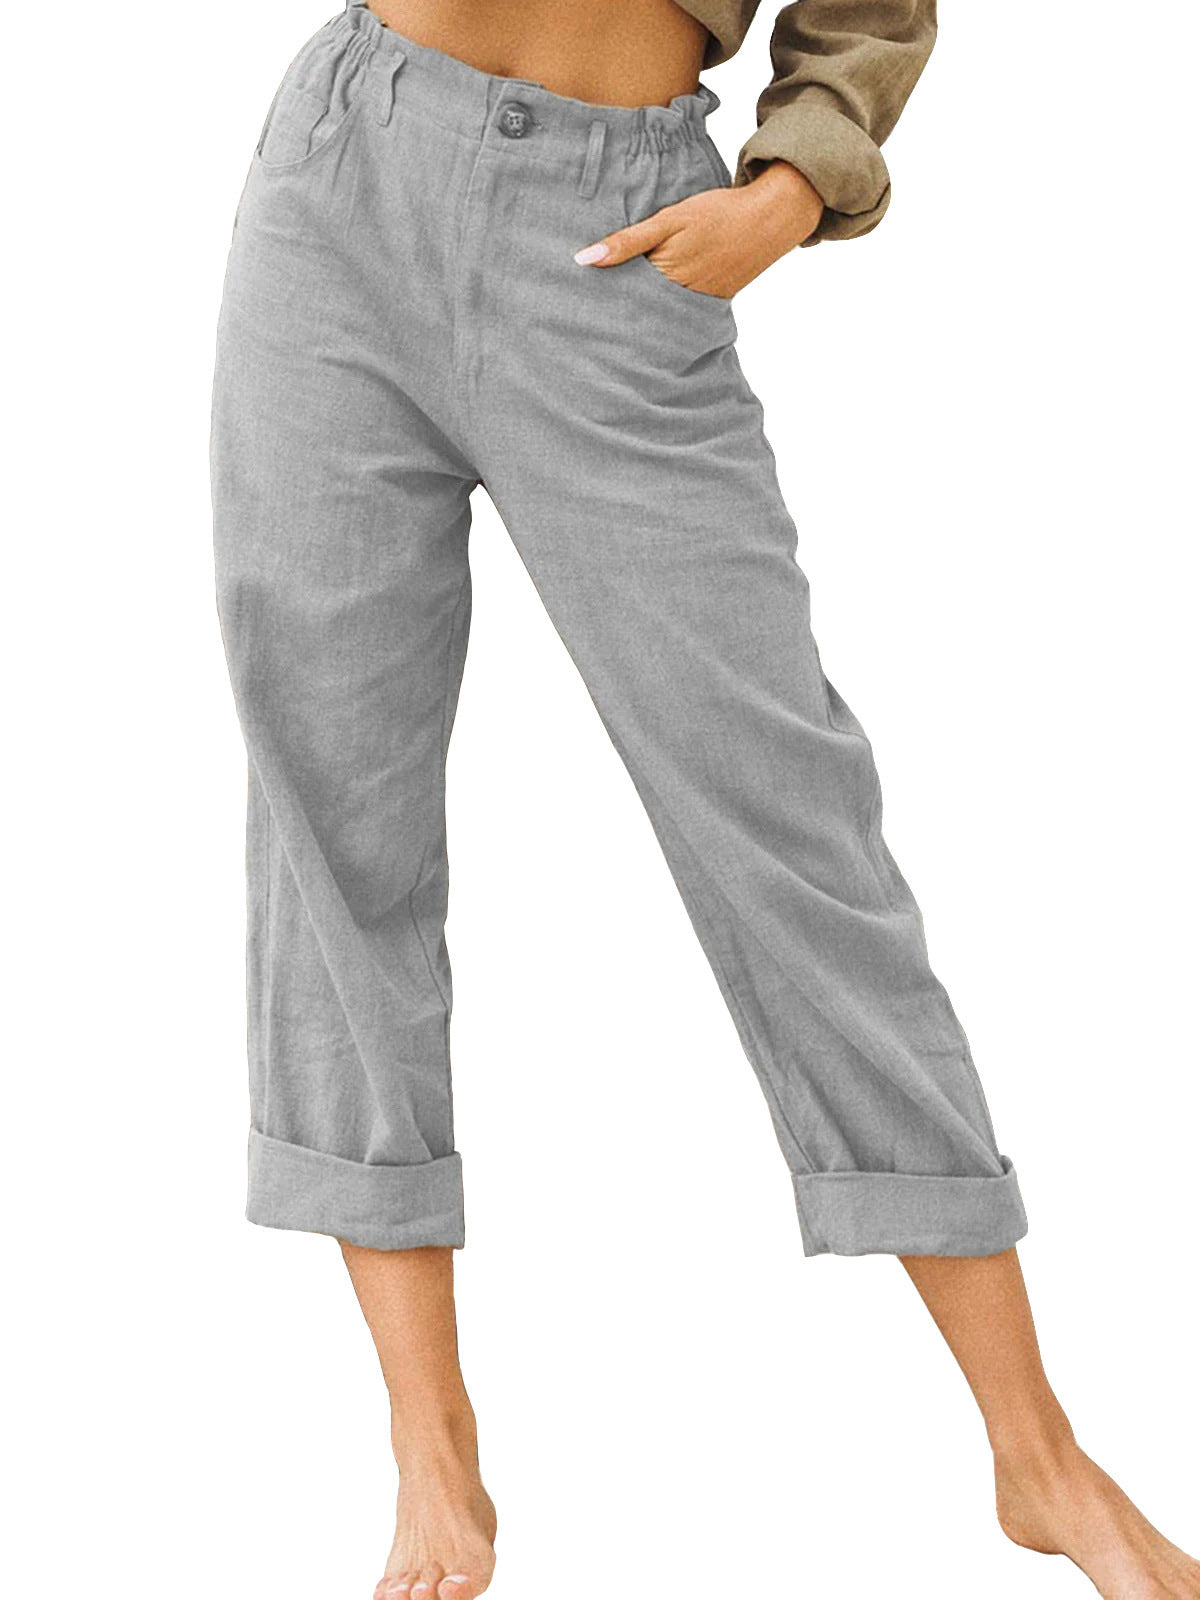 Women's Urban Leisure Summer Solid Color Cotton Linen Fashion Loose High Waist Casual Trousers